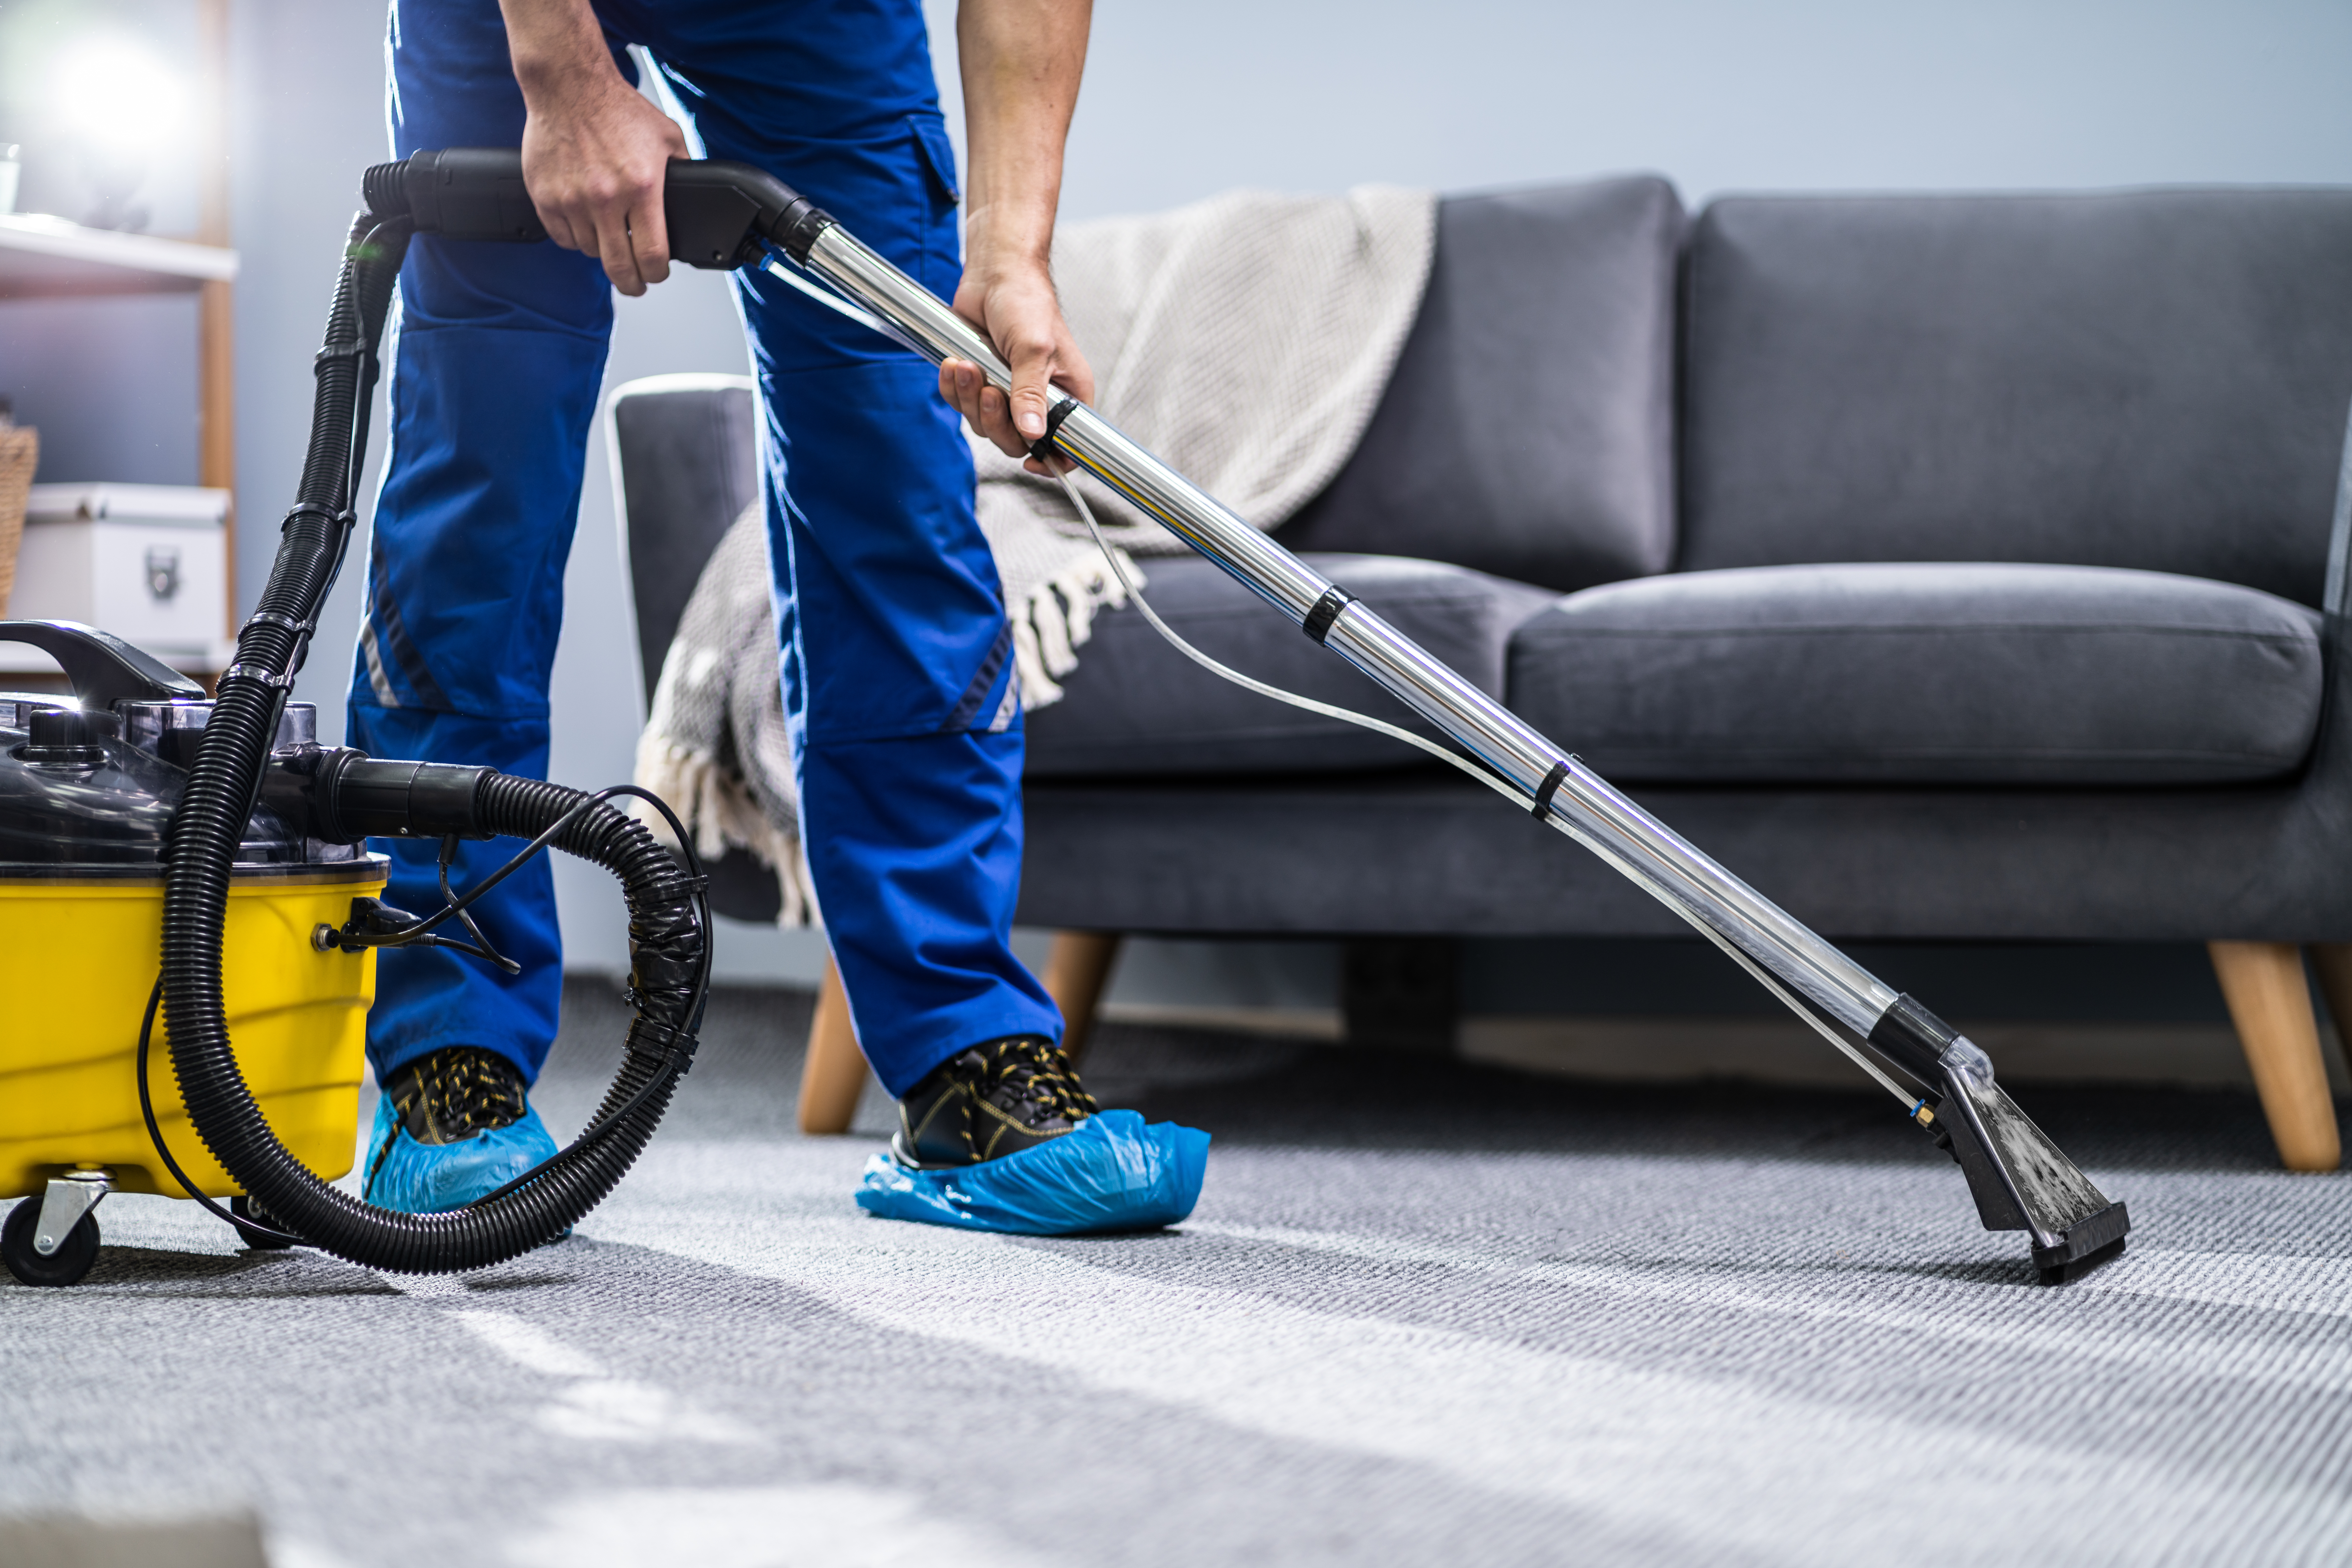 3 Steps to Achieve High-Quality, Data-Driven Cleaning